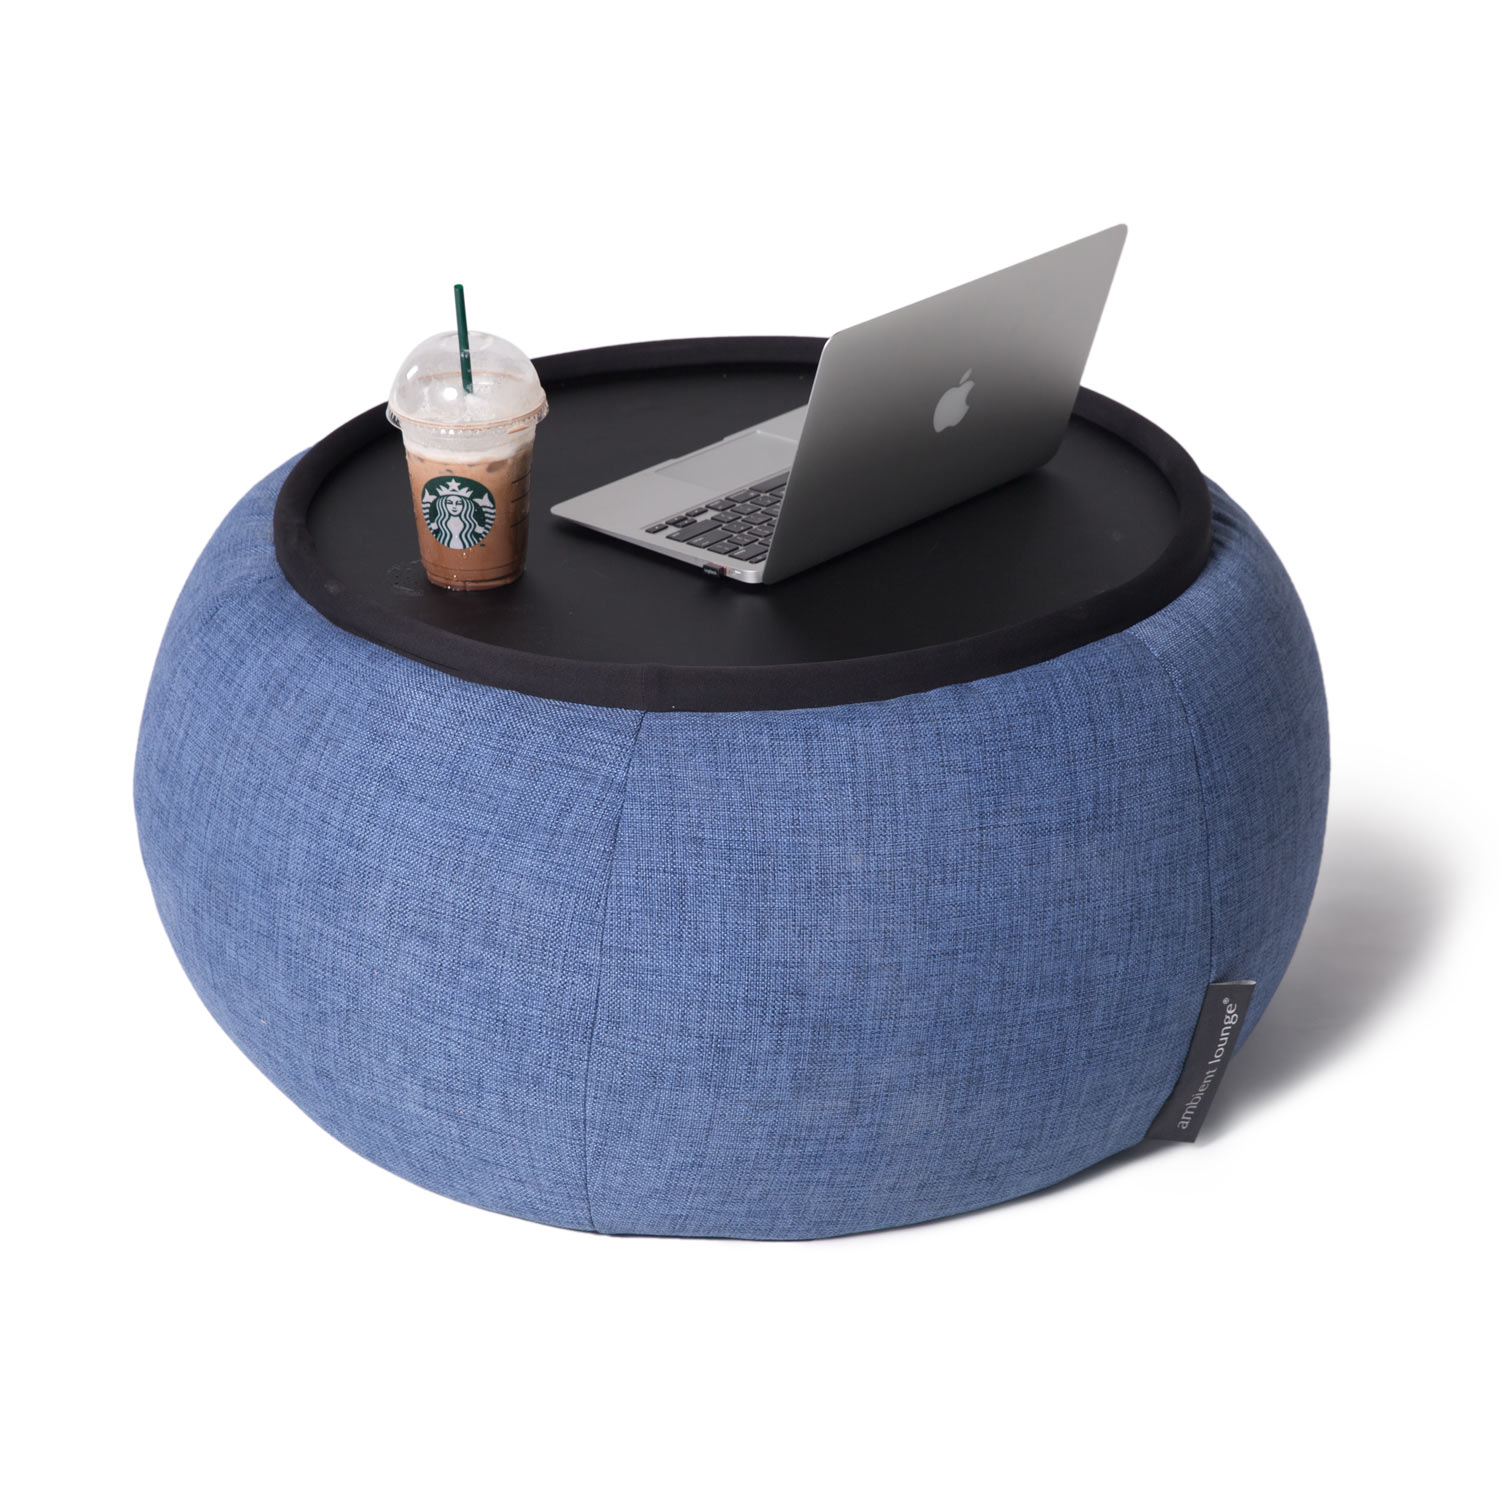 Versa Table Blue Jazz by Ambient Lounge